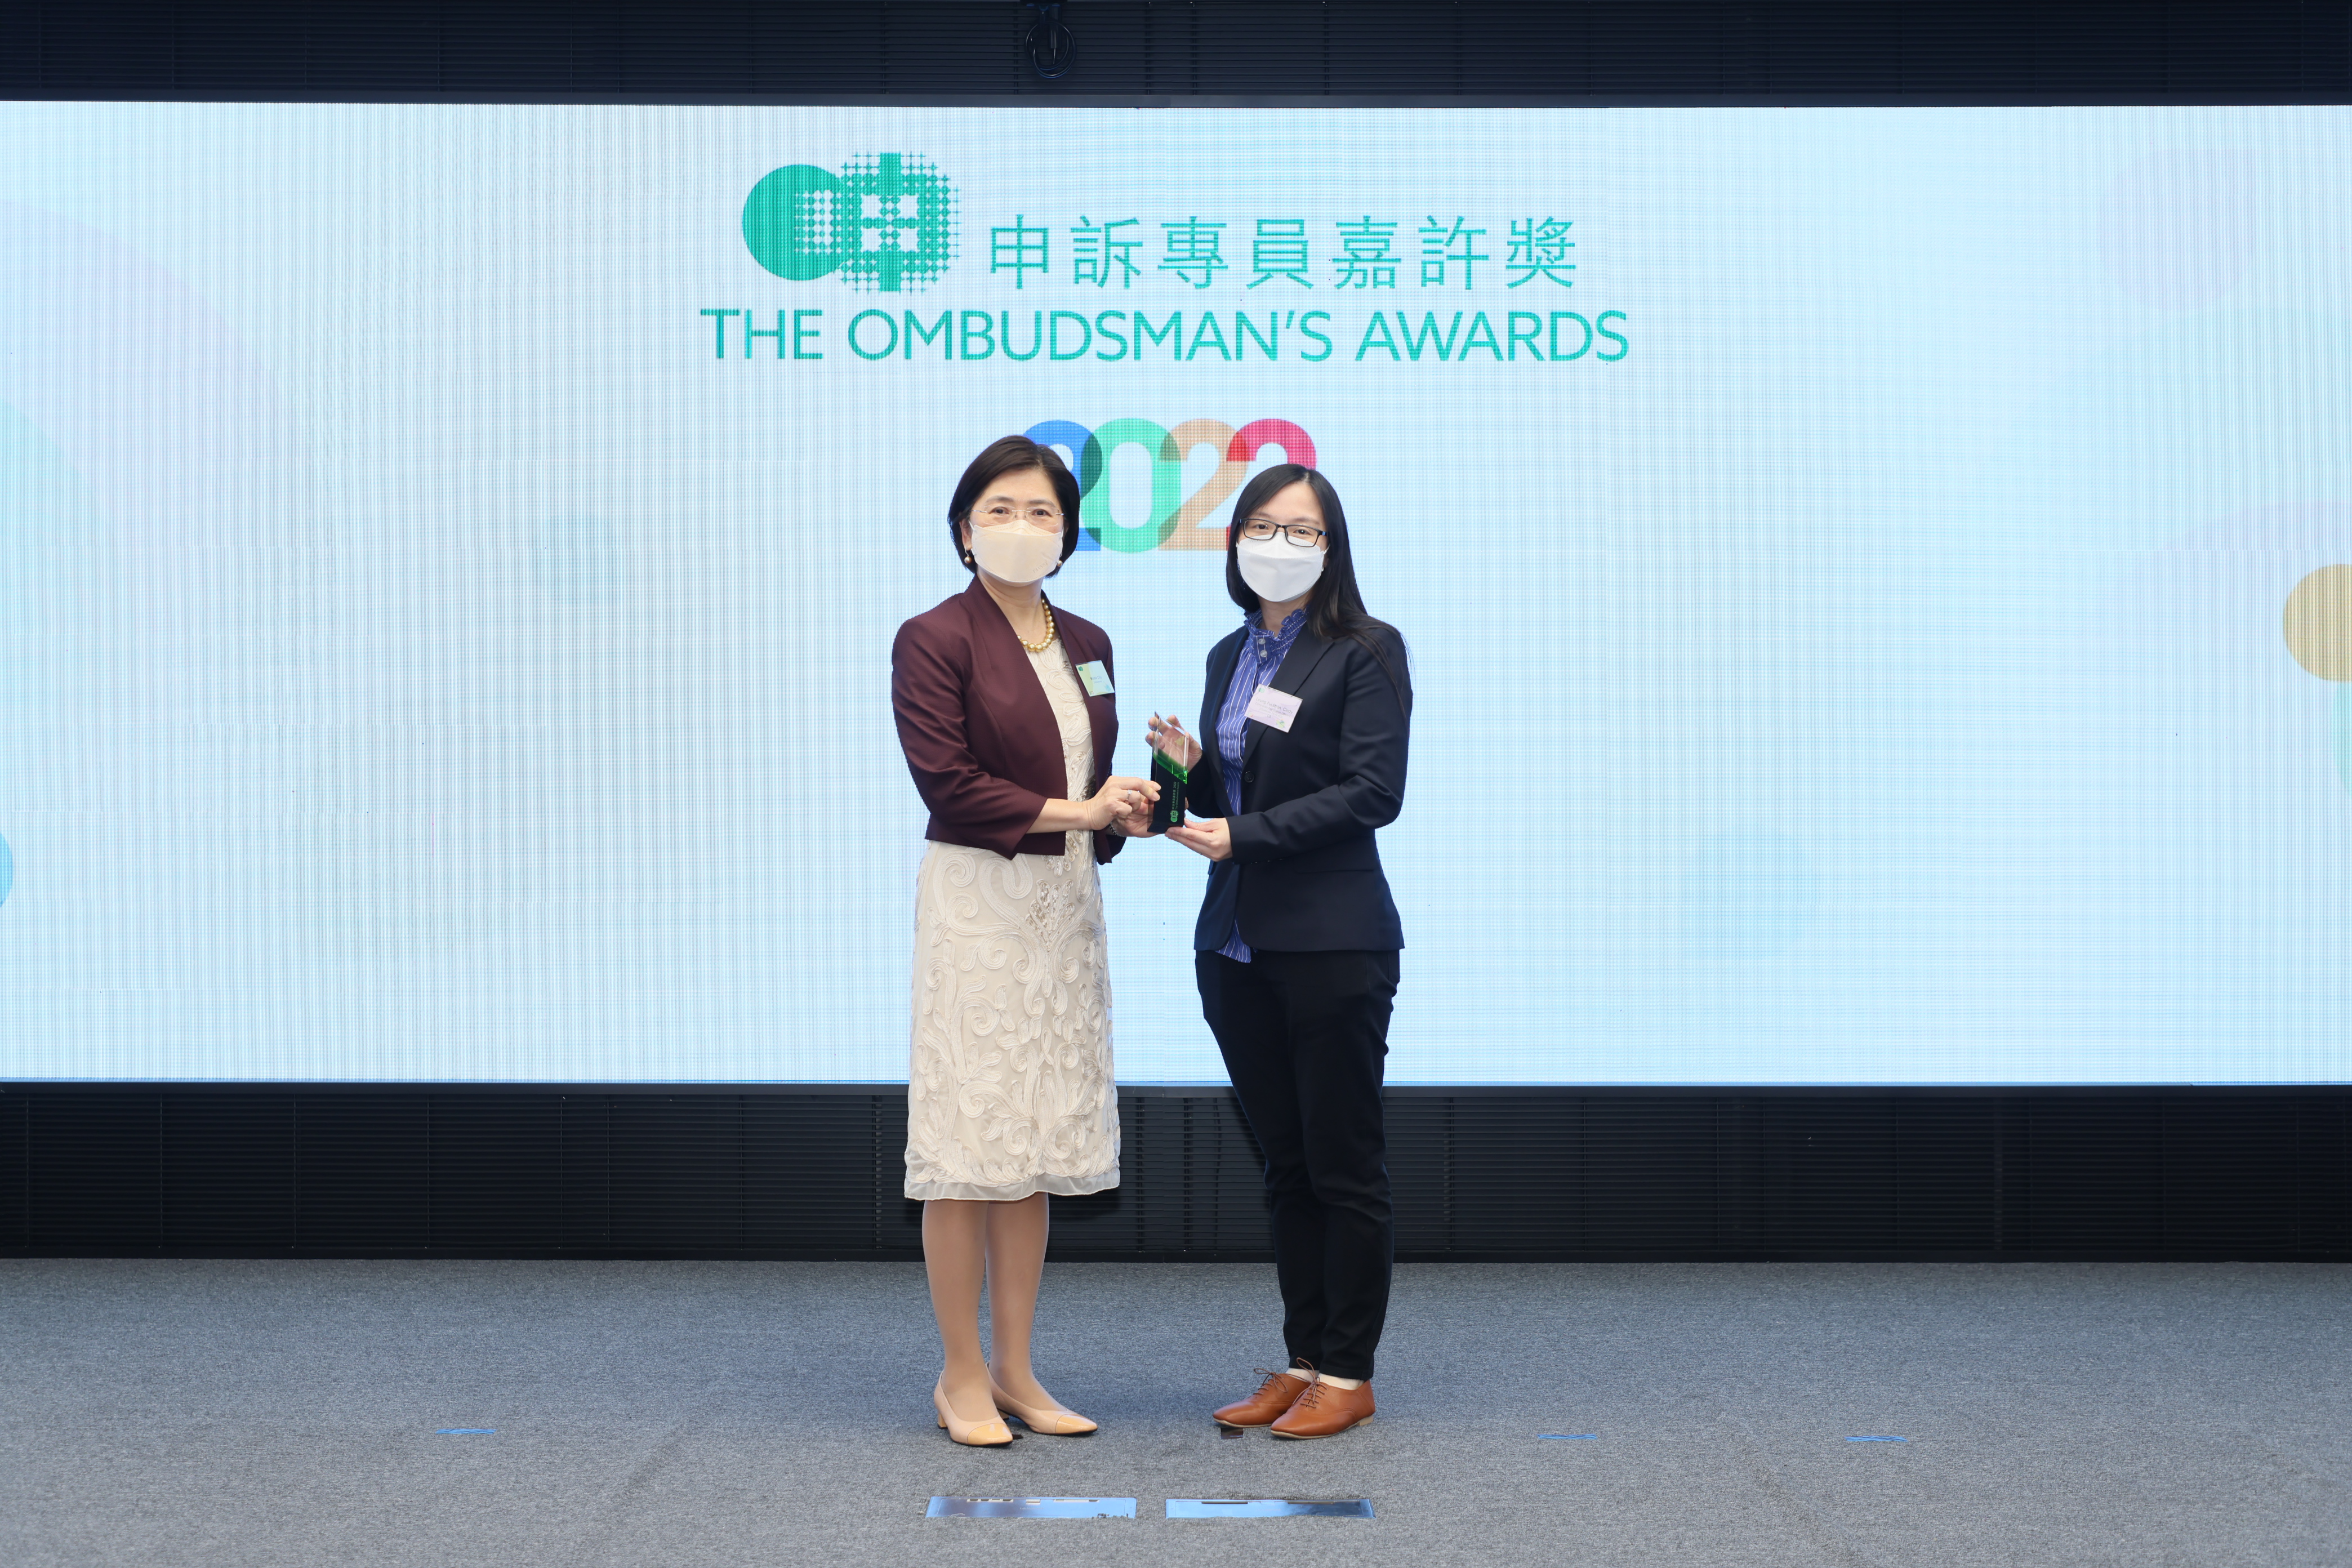 Ms Cindy Leung, Assistant Registry Manager (right), received the Award at the Award Presentation Ceremony.